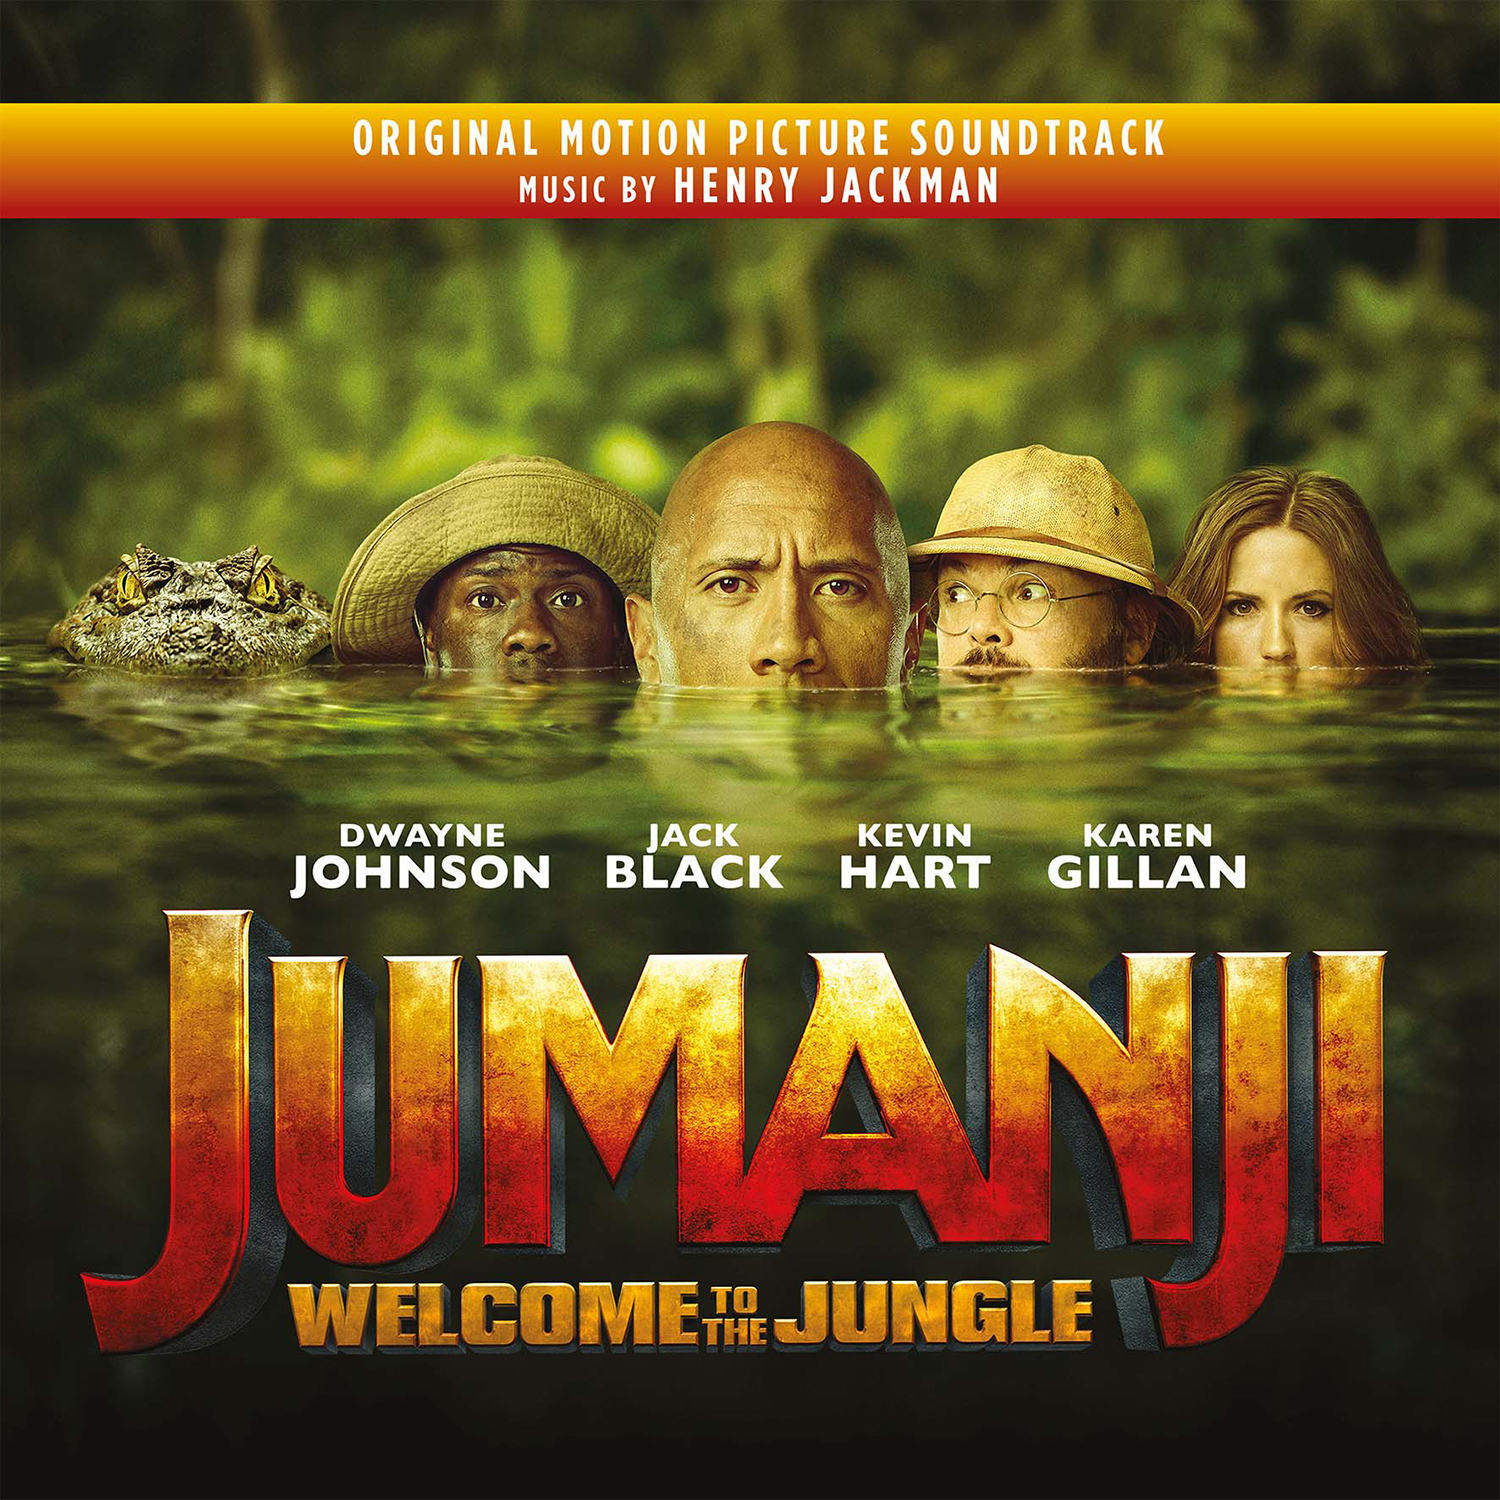 JUMANJI: WELCOME TO THE JUNGLE - LP 180 GR. COLORED SILVER & BLACK MARBLED /250